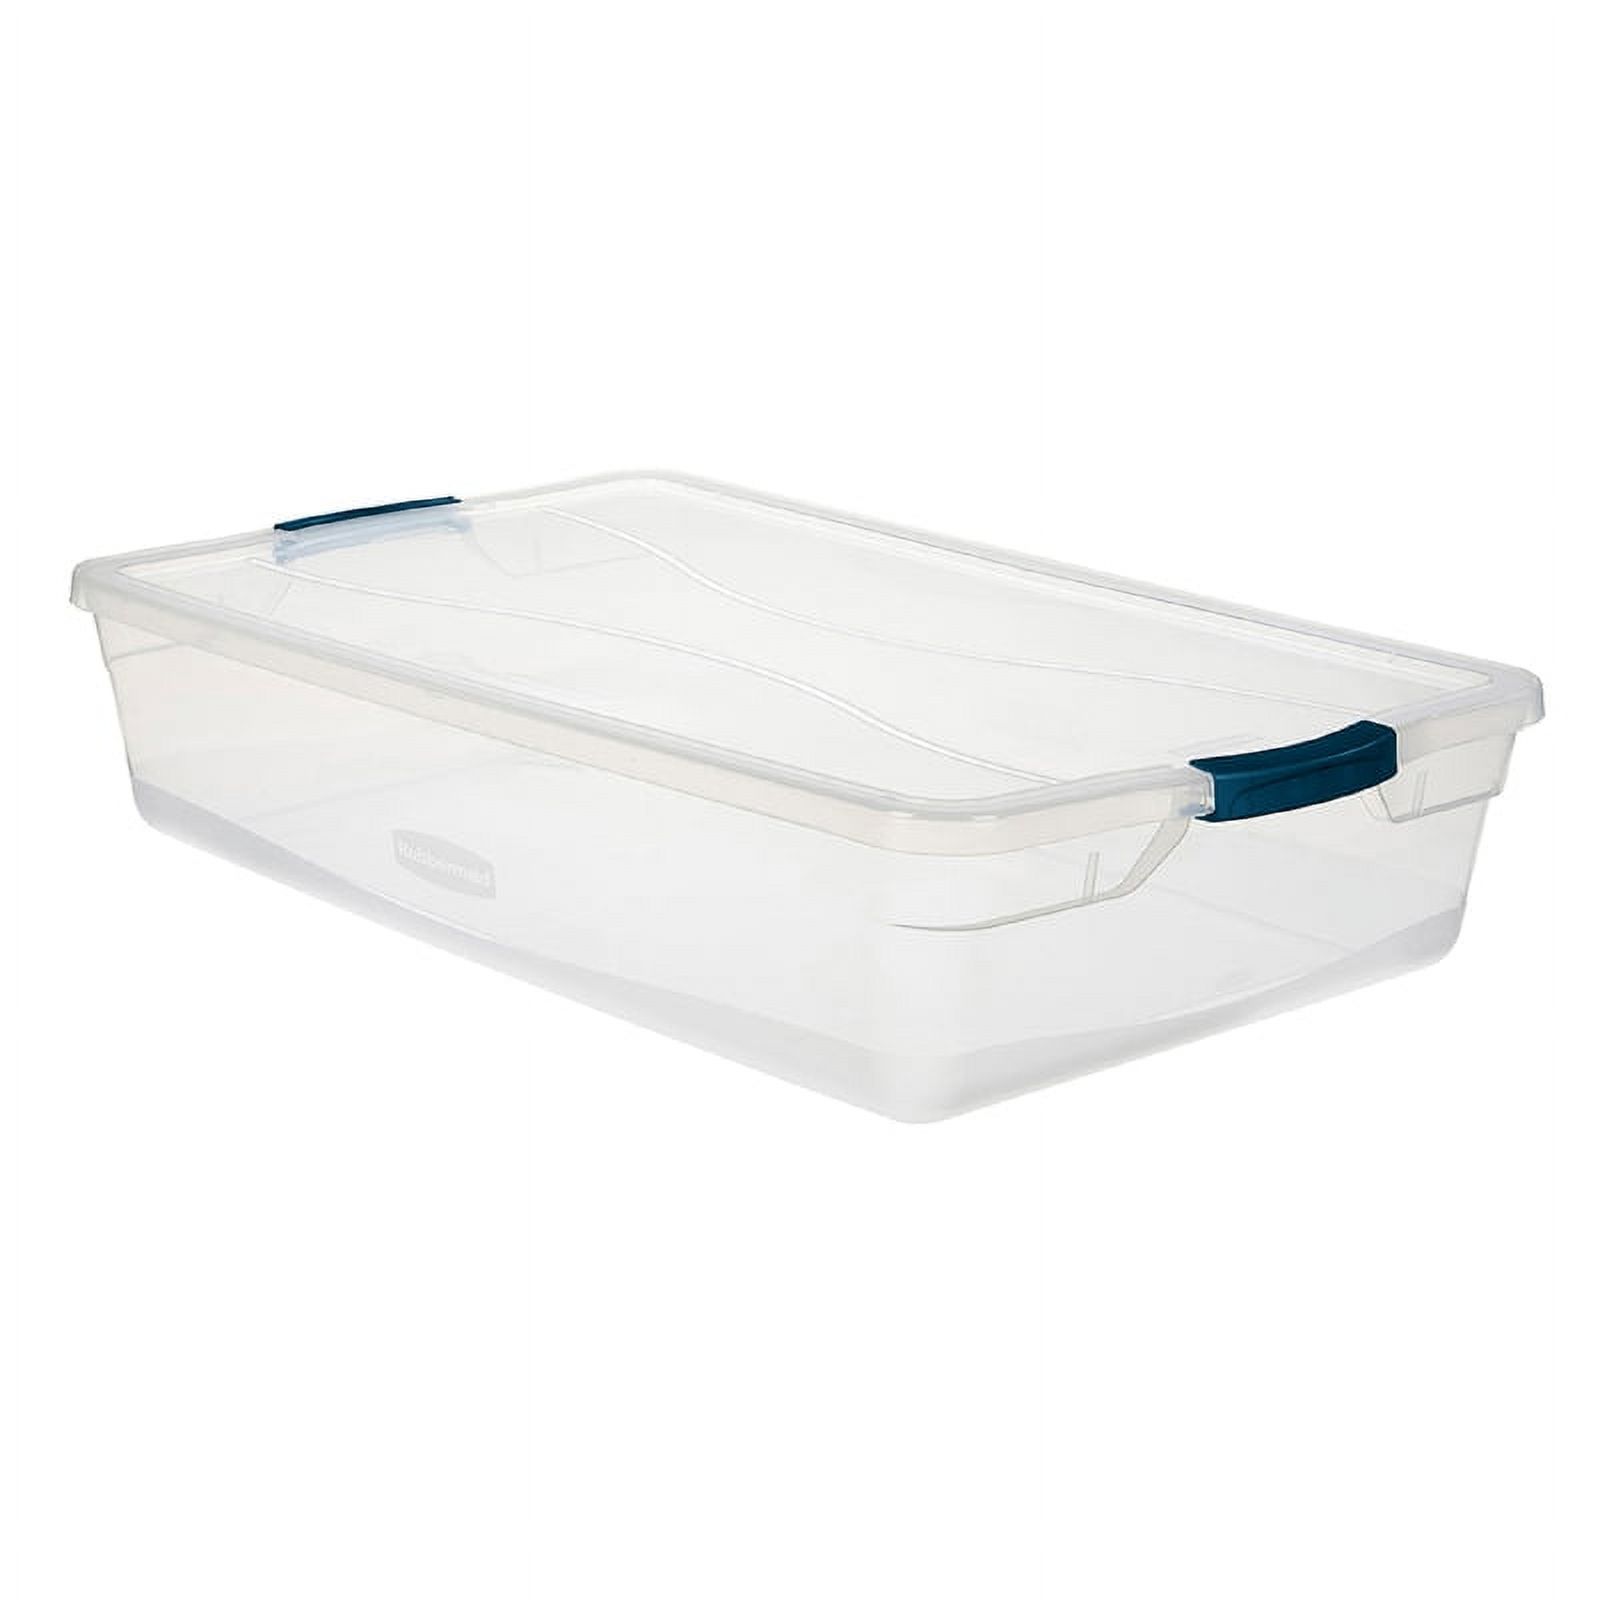 STORAGE TOTE CLEAR 41QT - image 1 of 2